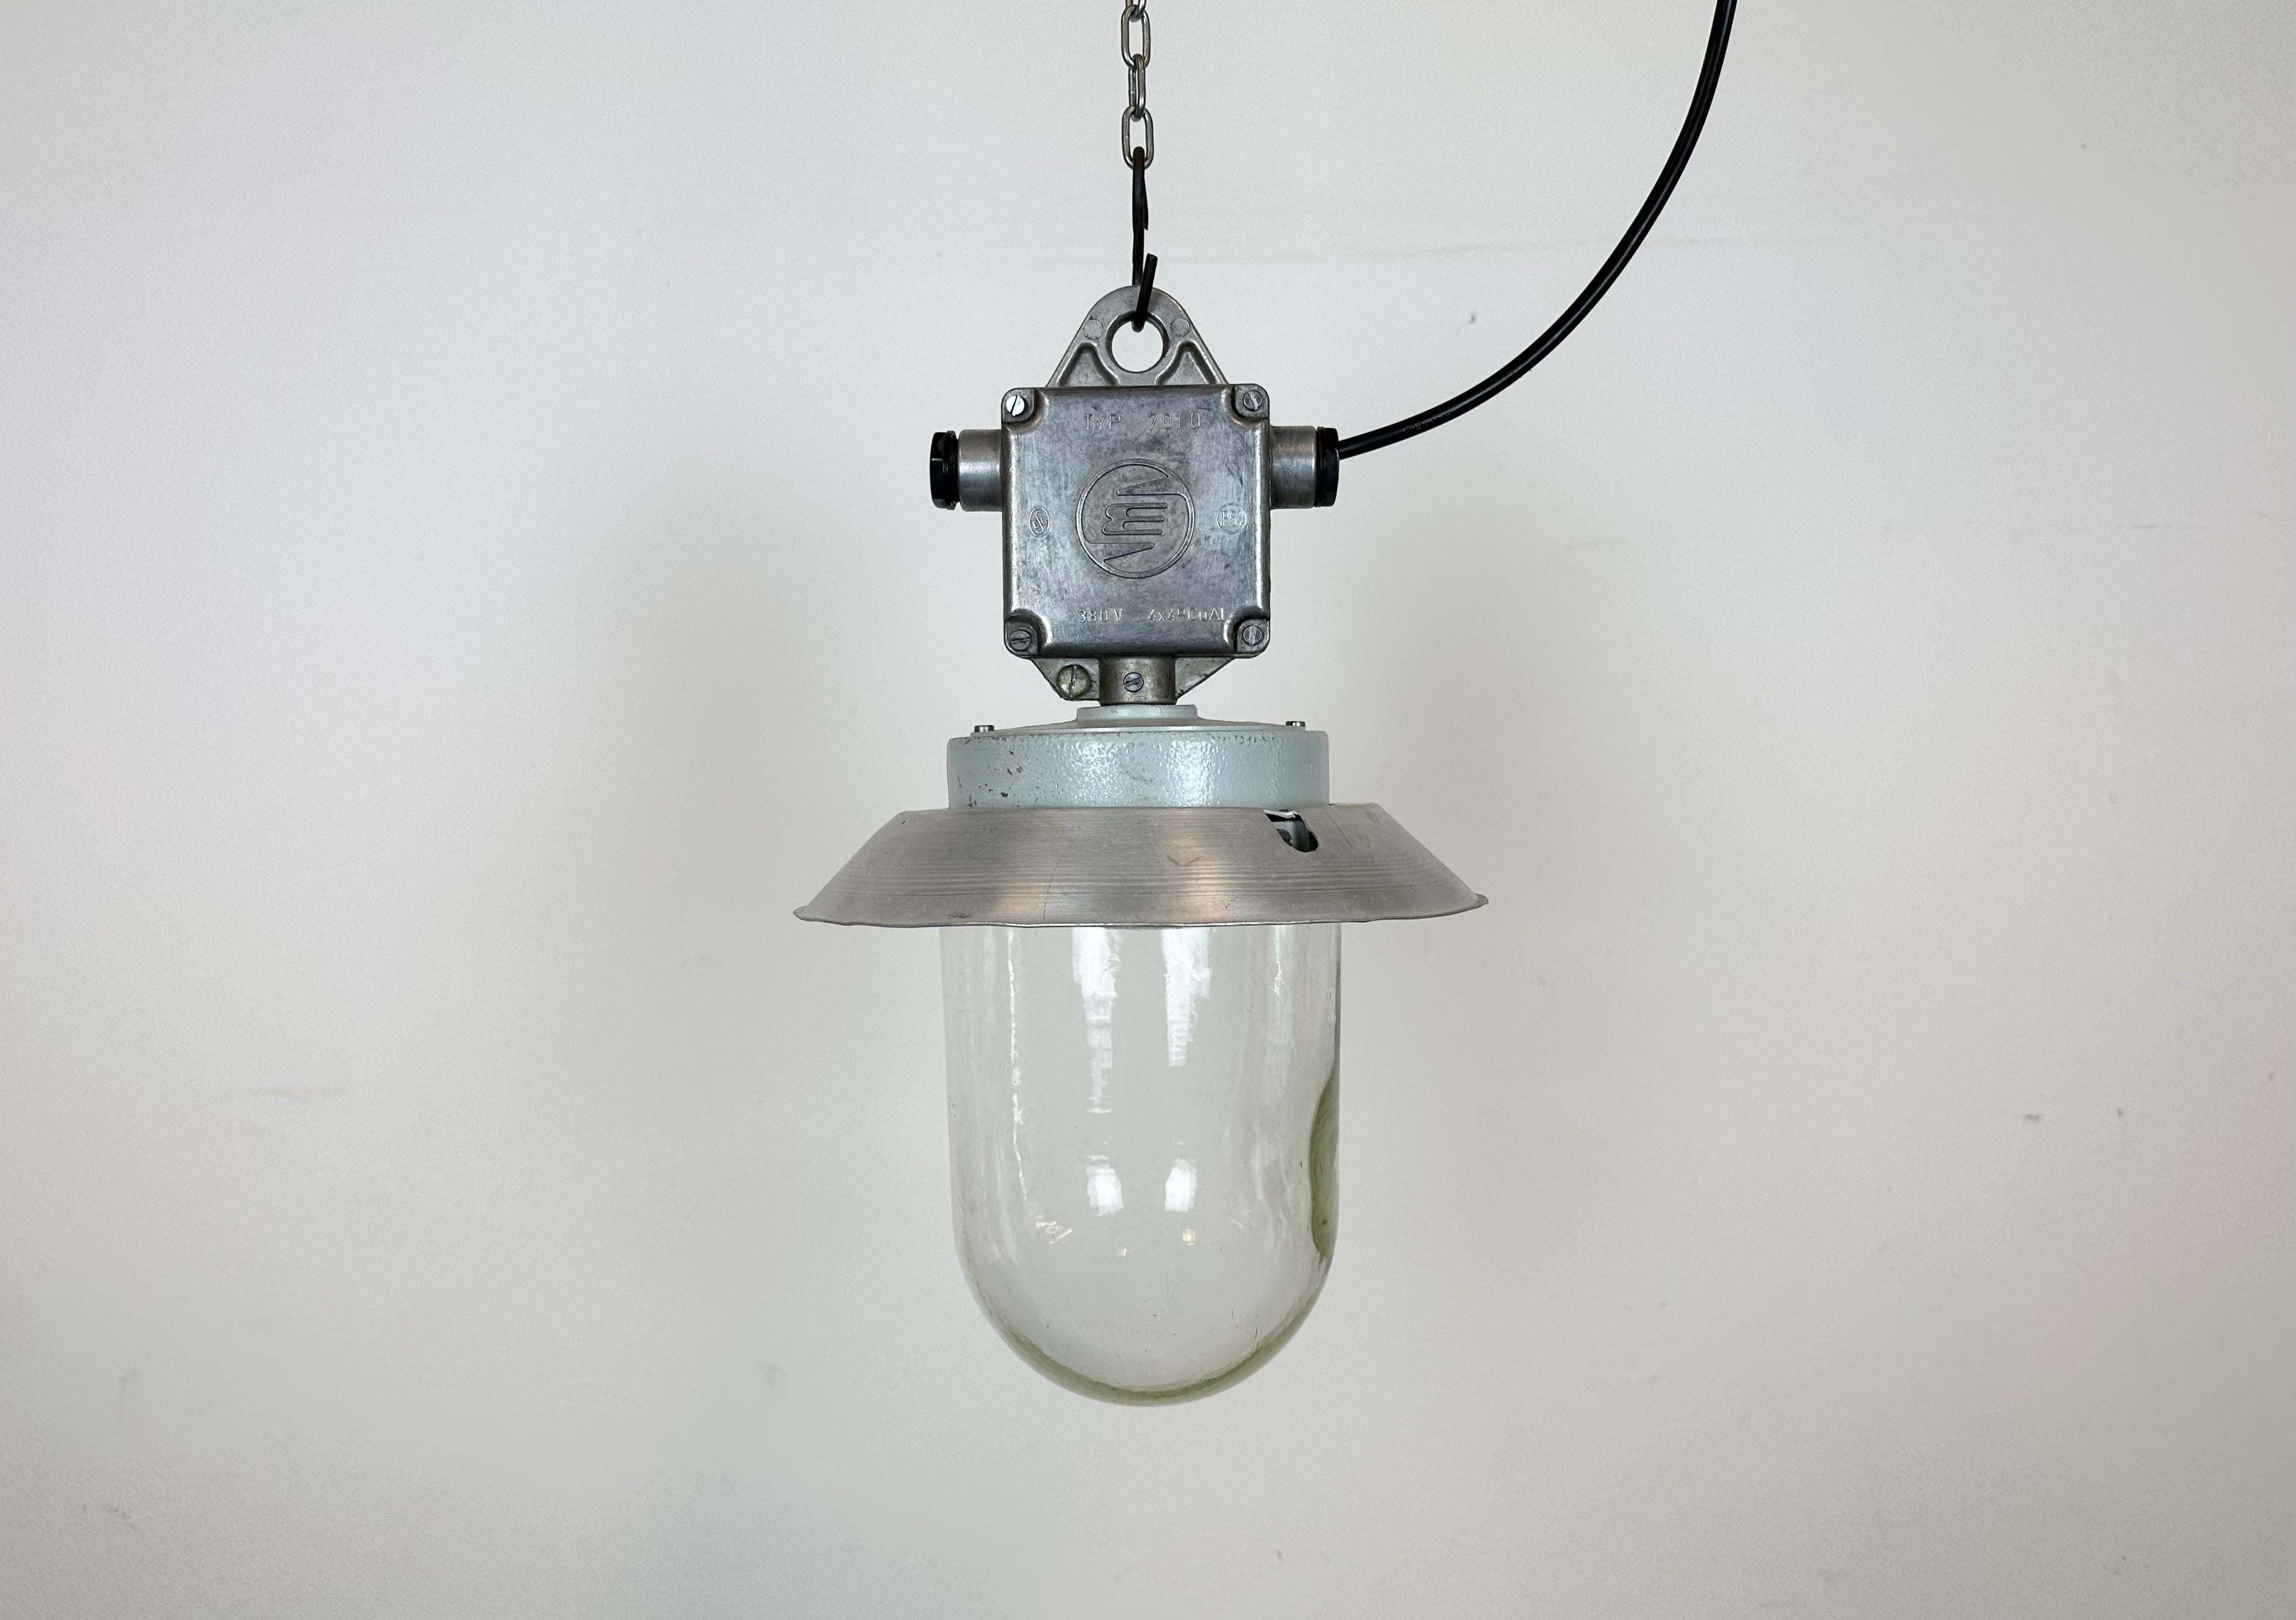 This Industrial wall light was made by Elektrosvit in former Czechoslovakia during the 1970s. It features a cast aluminium top, an aluminium shade and a clear glass cover. New porcelain socket requires standard E 27/ E26 light bulbs. New wire. The